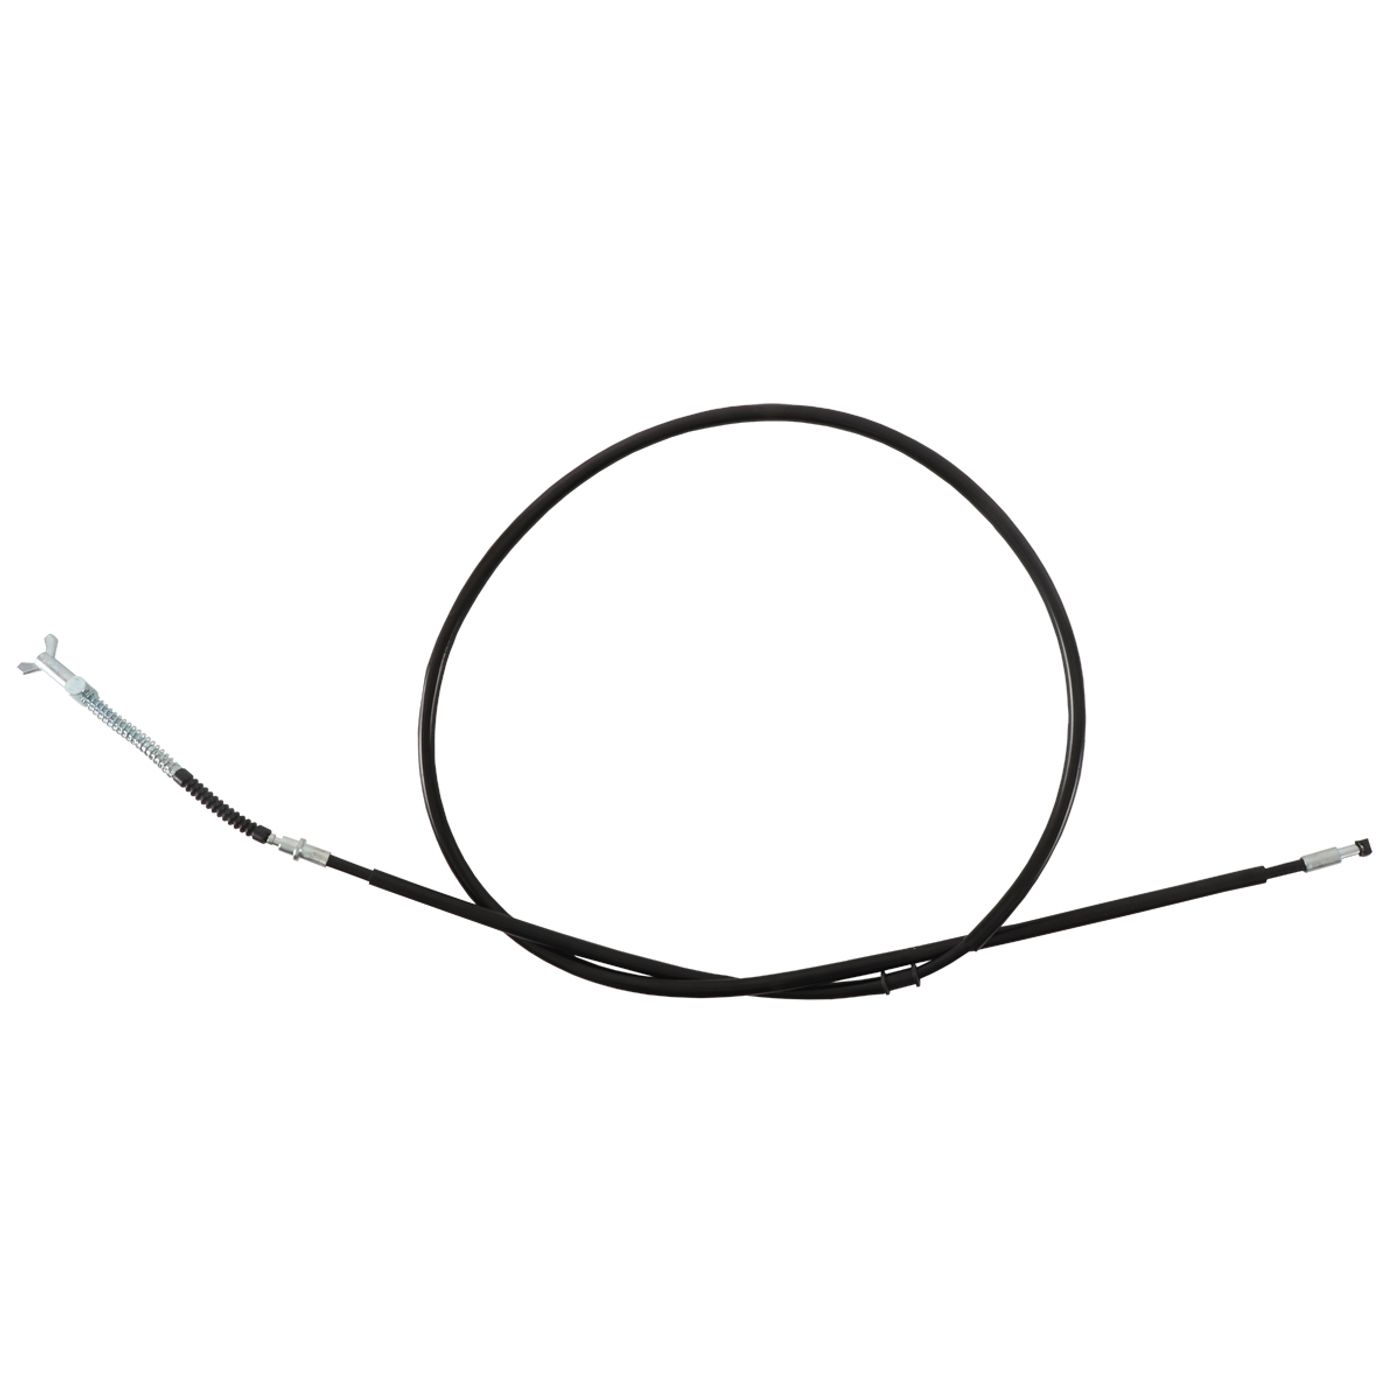 Wrp Clutch Cables - WRP454076 image